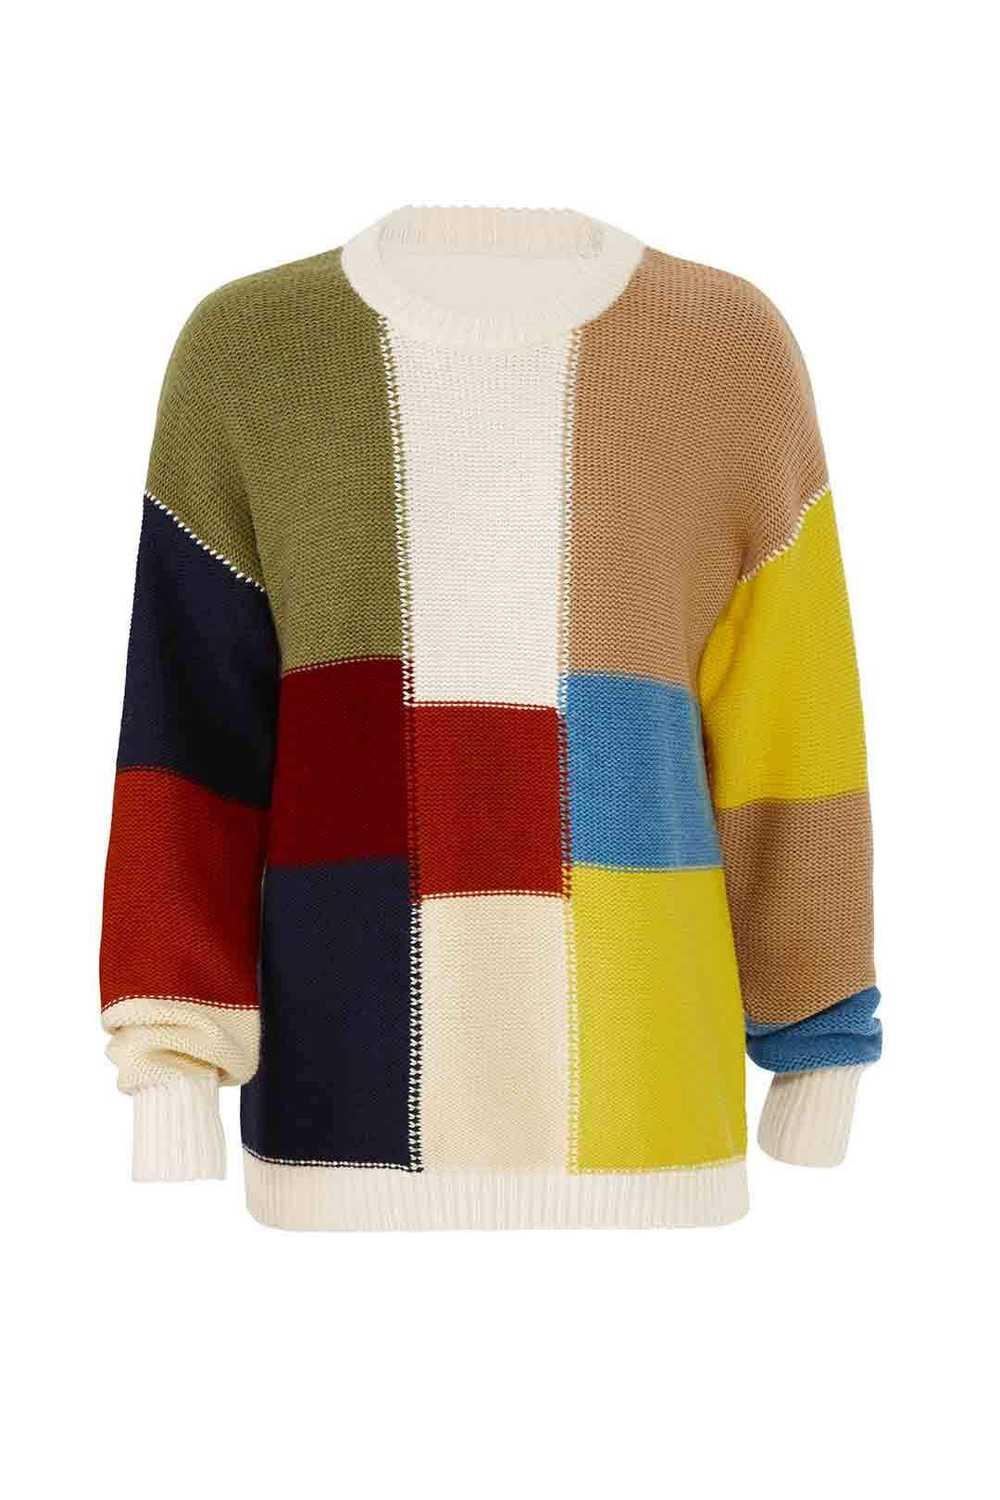 See by Chloé Patchwork Straight Sweater - image 4